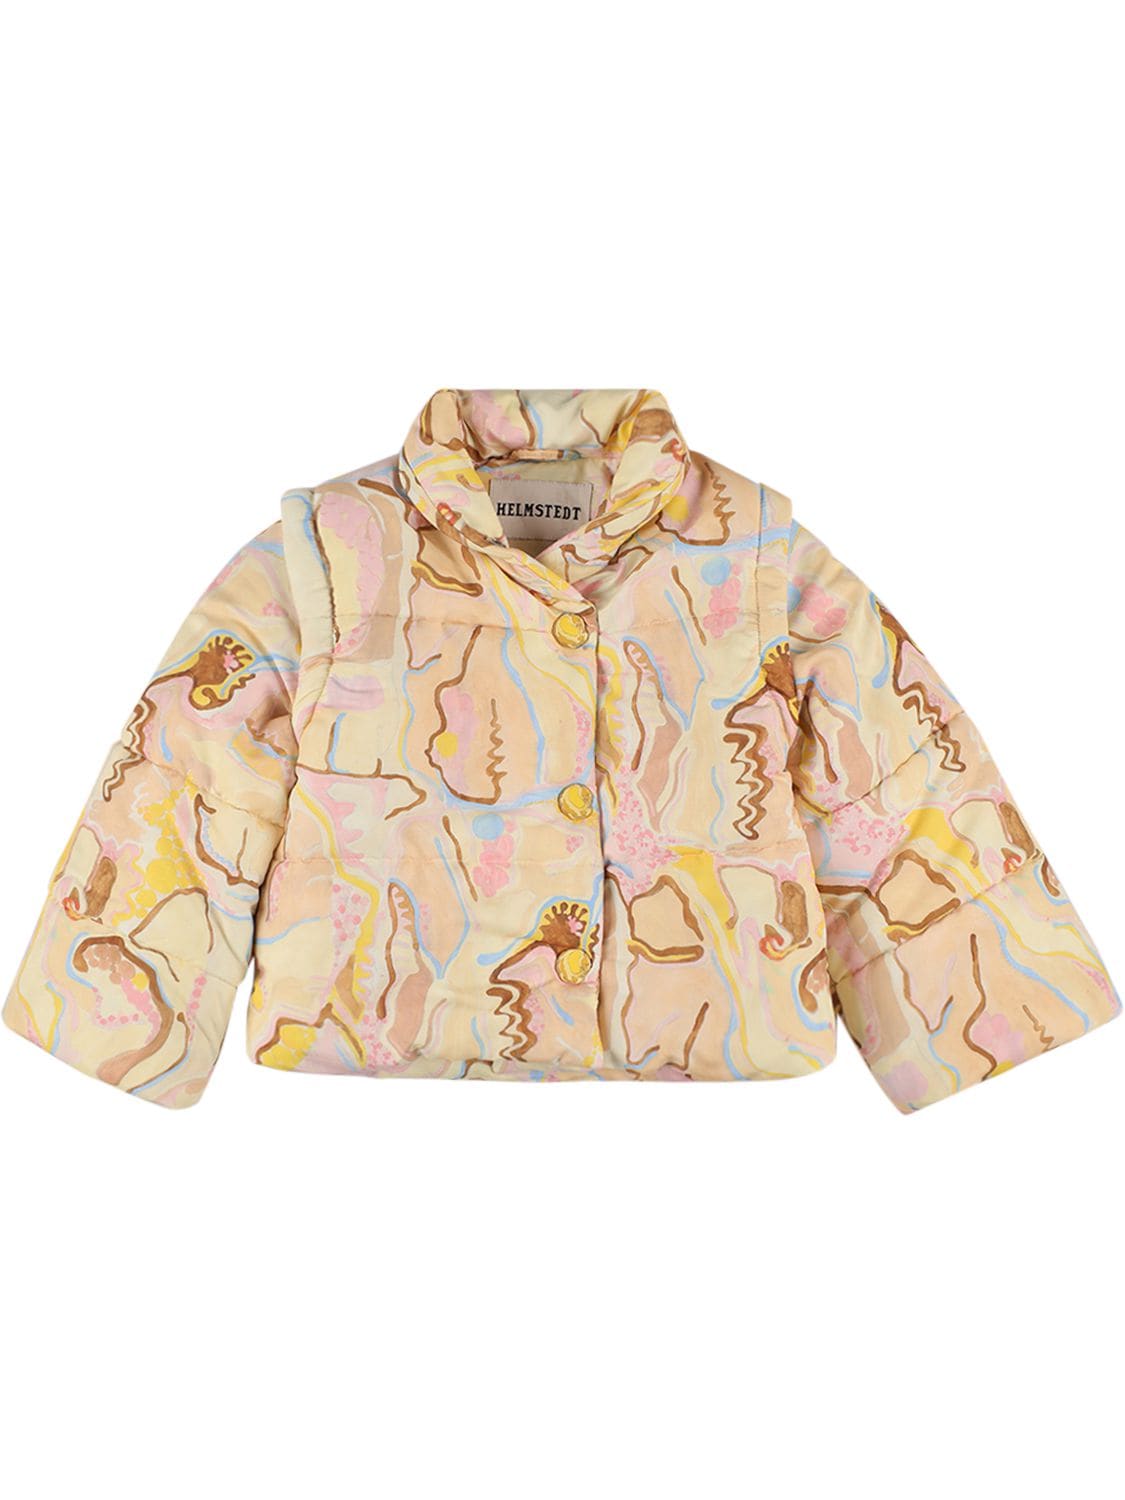 HELMSTEDT PRINTED RECYCLED PUFFER JACKET